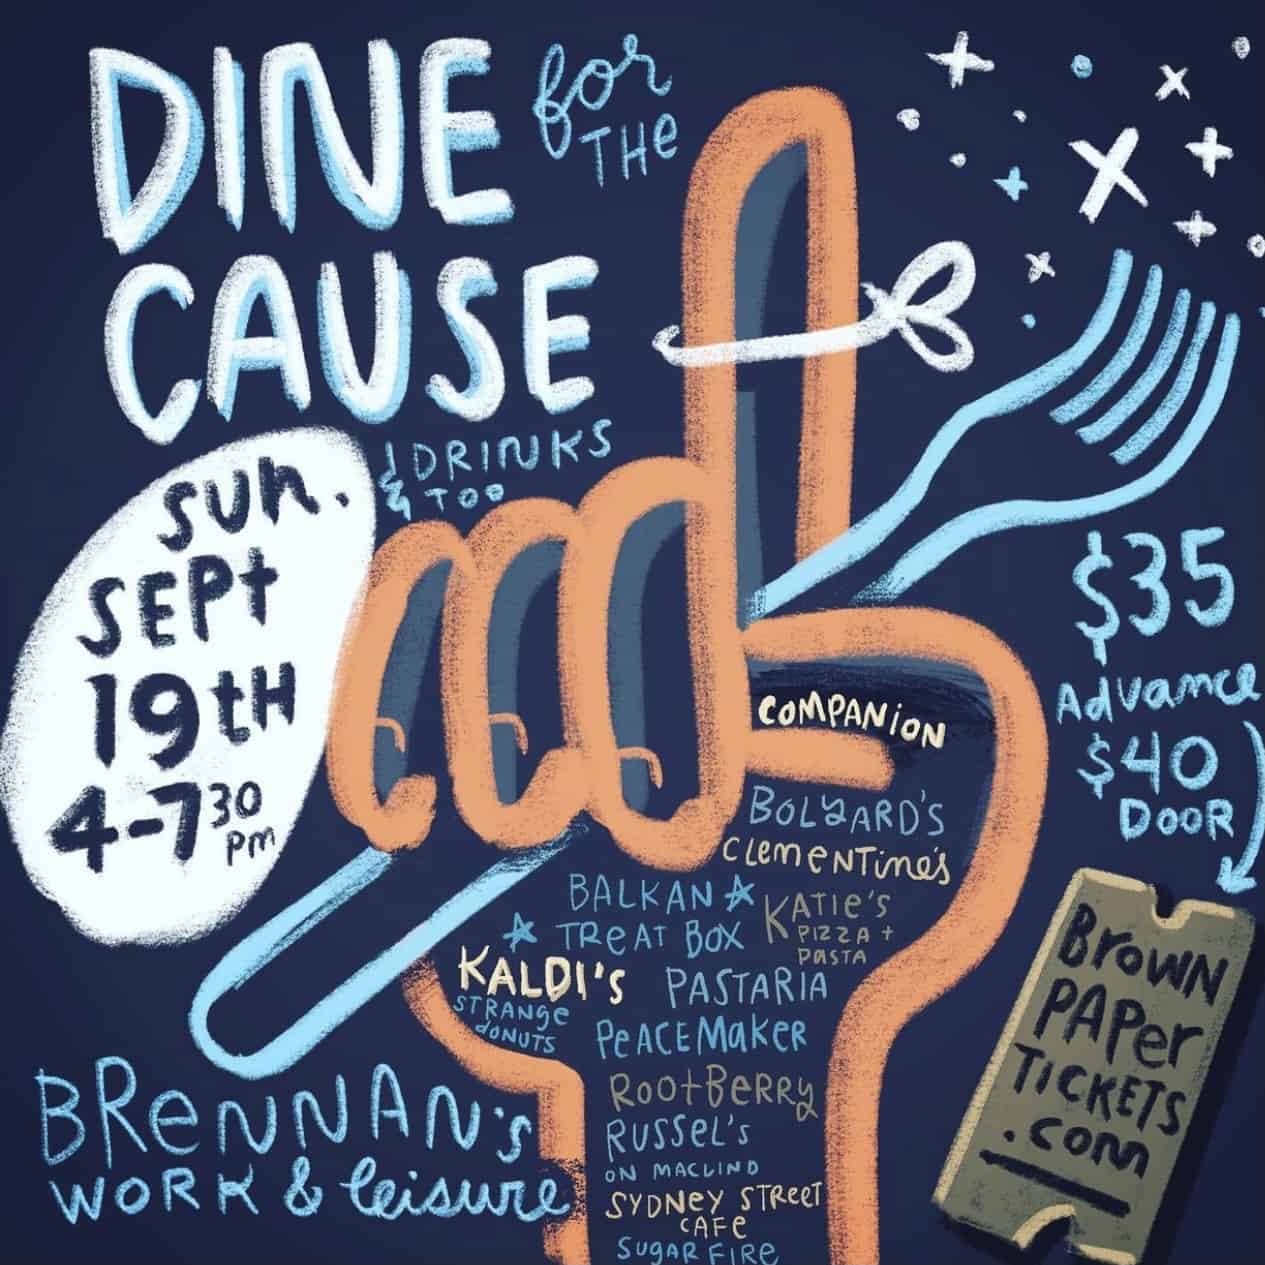 Dine for the Cause 2021 flyer